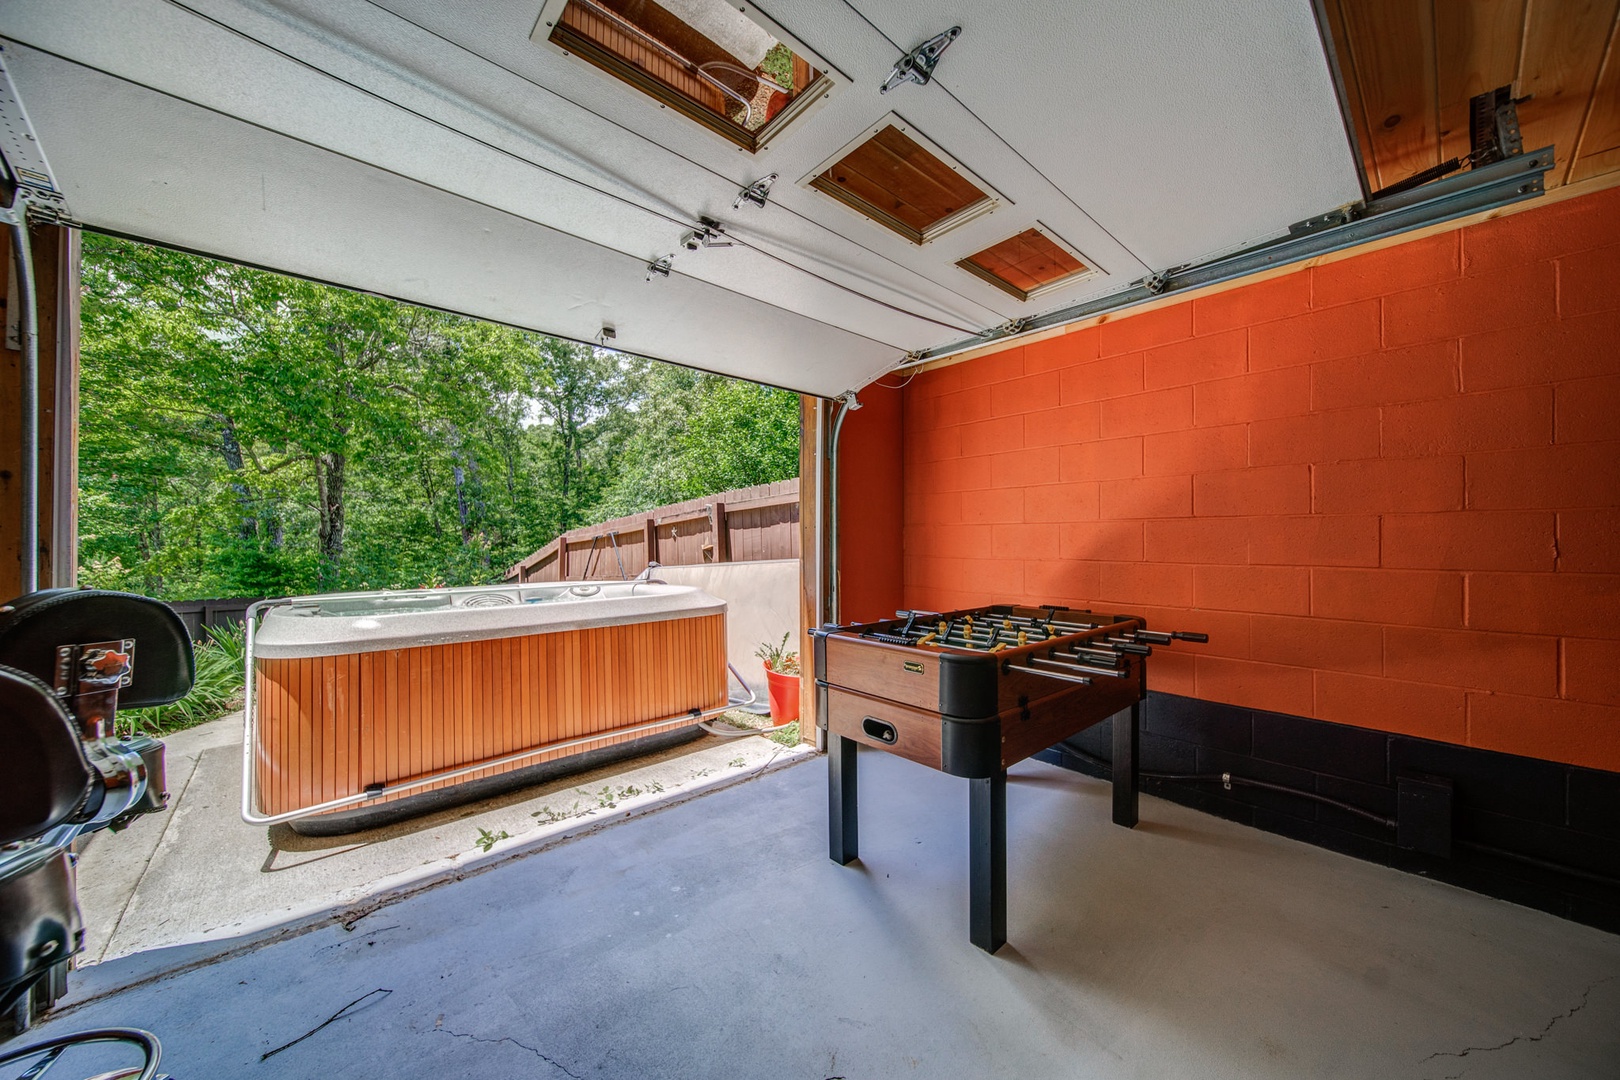 Bar and game room open up to the outdoor space for full on entertainment